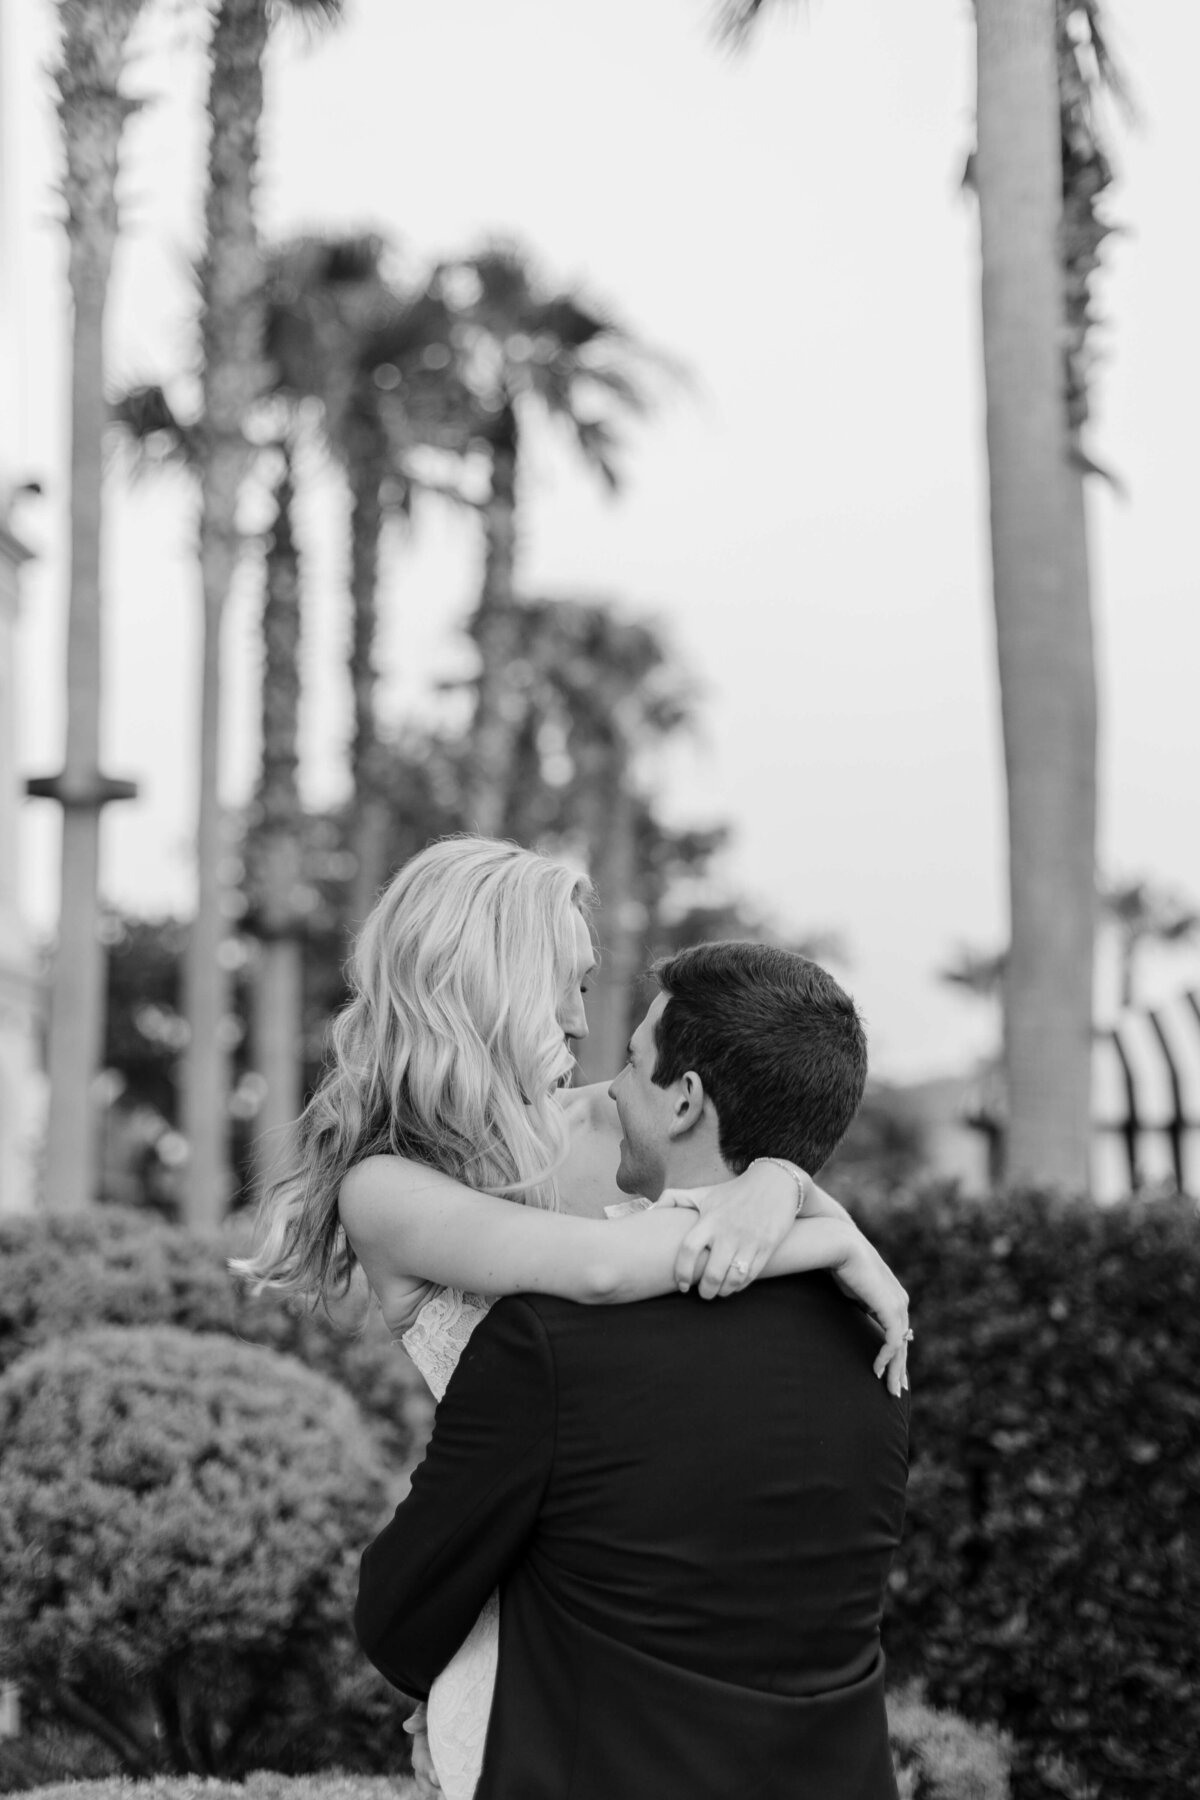 A groom holds his bride in his arms.